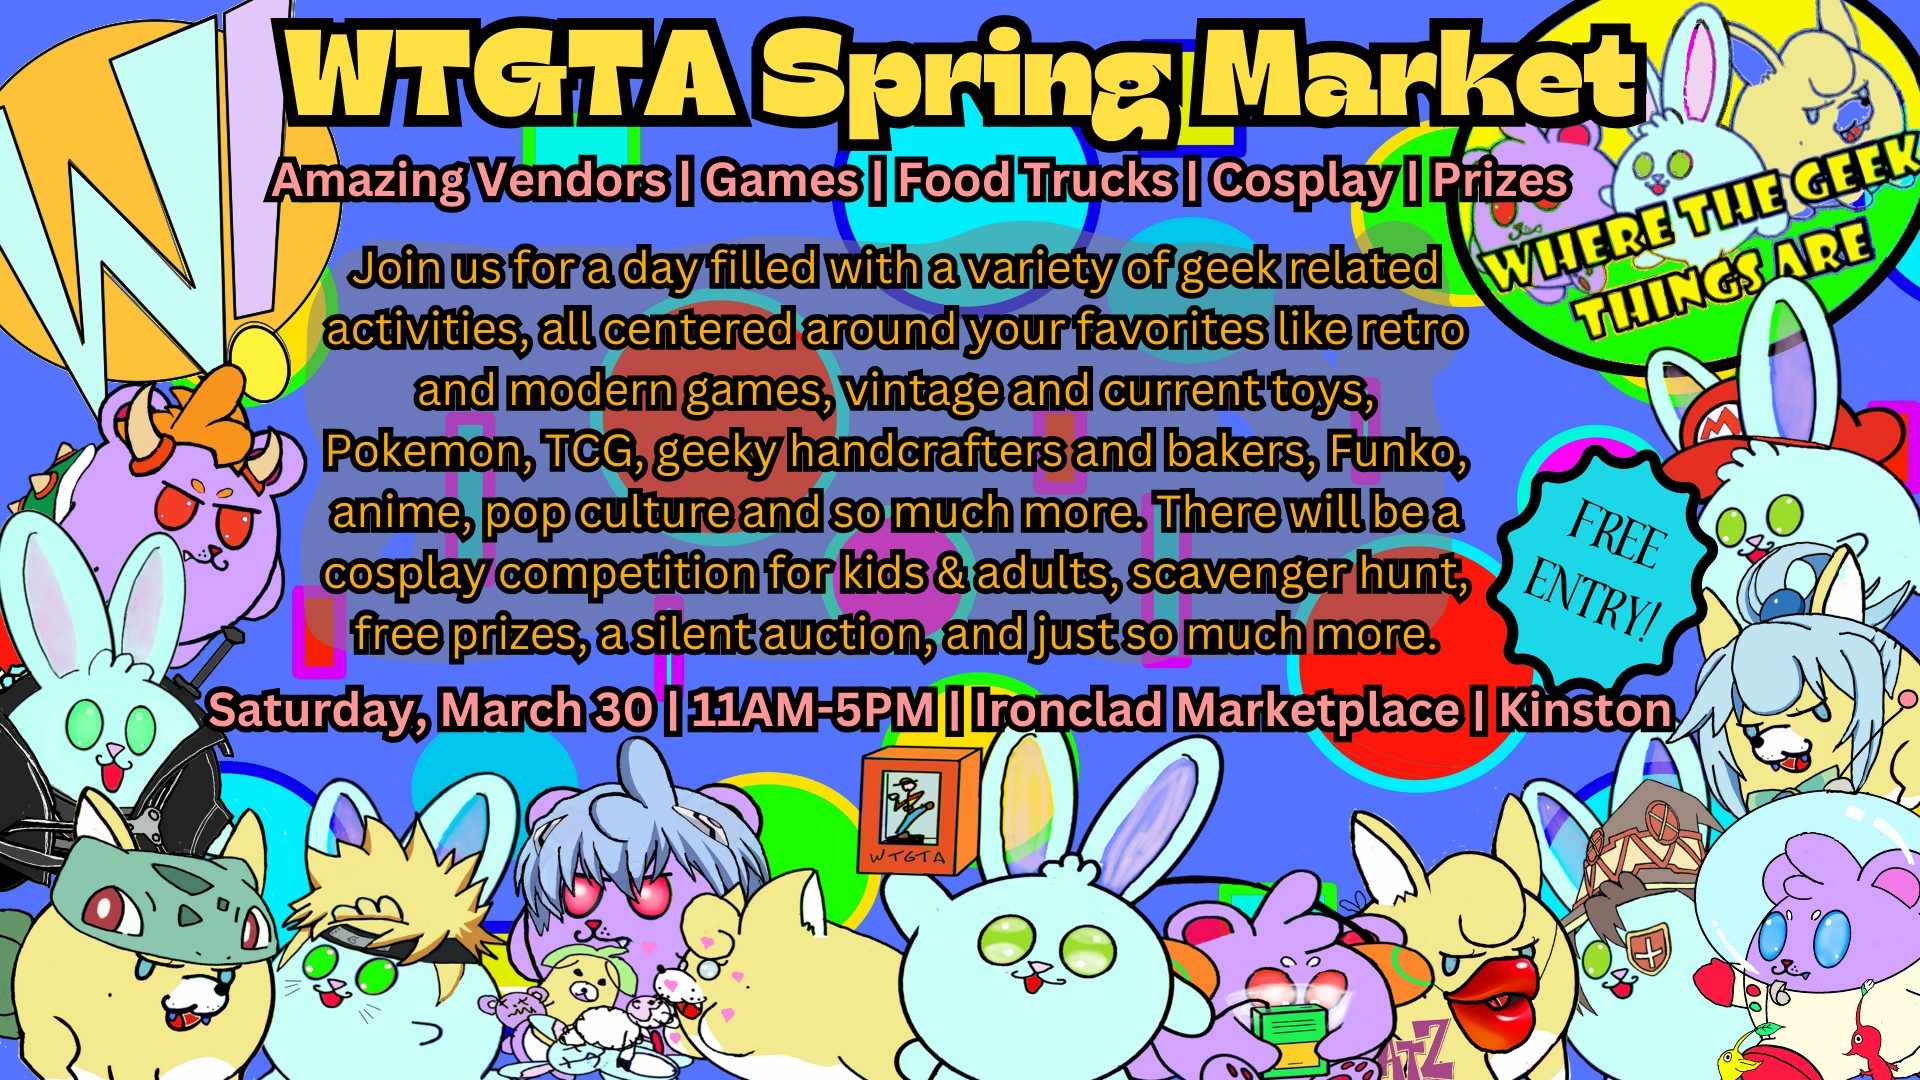 Where The Geek Things Are Spring Market cover image